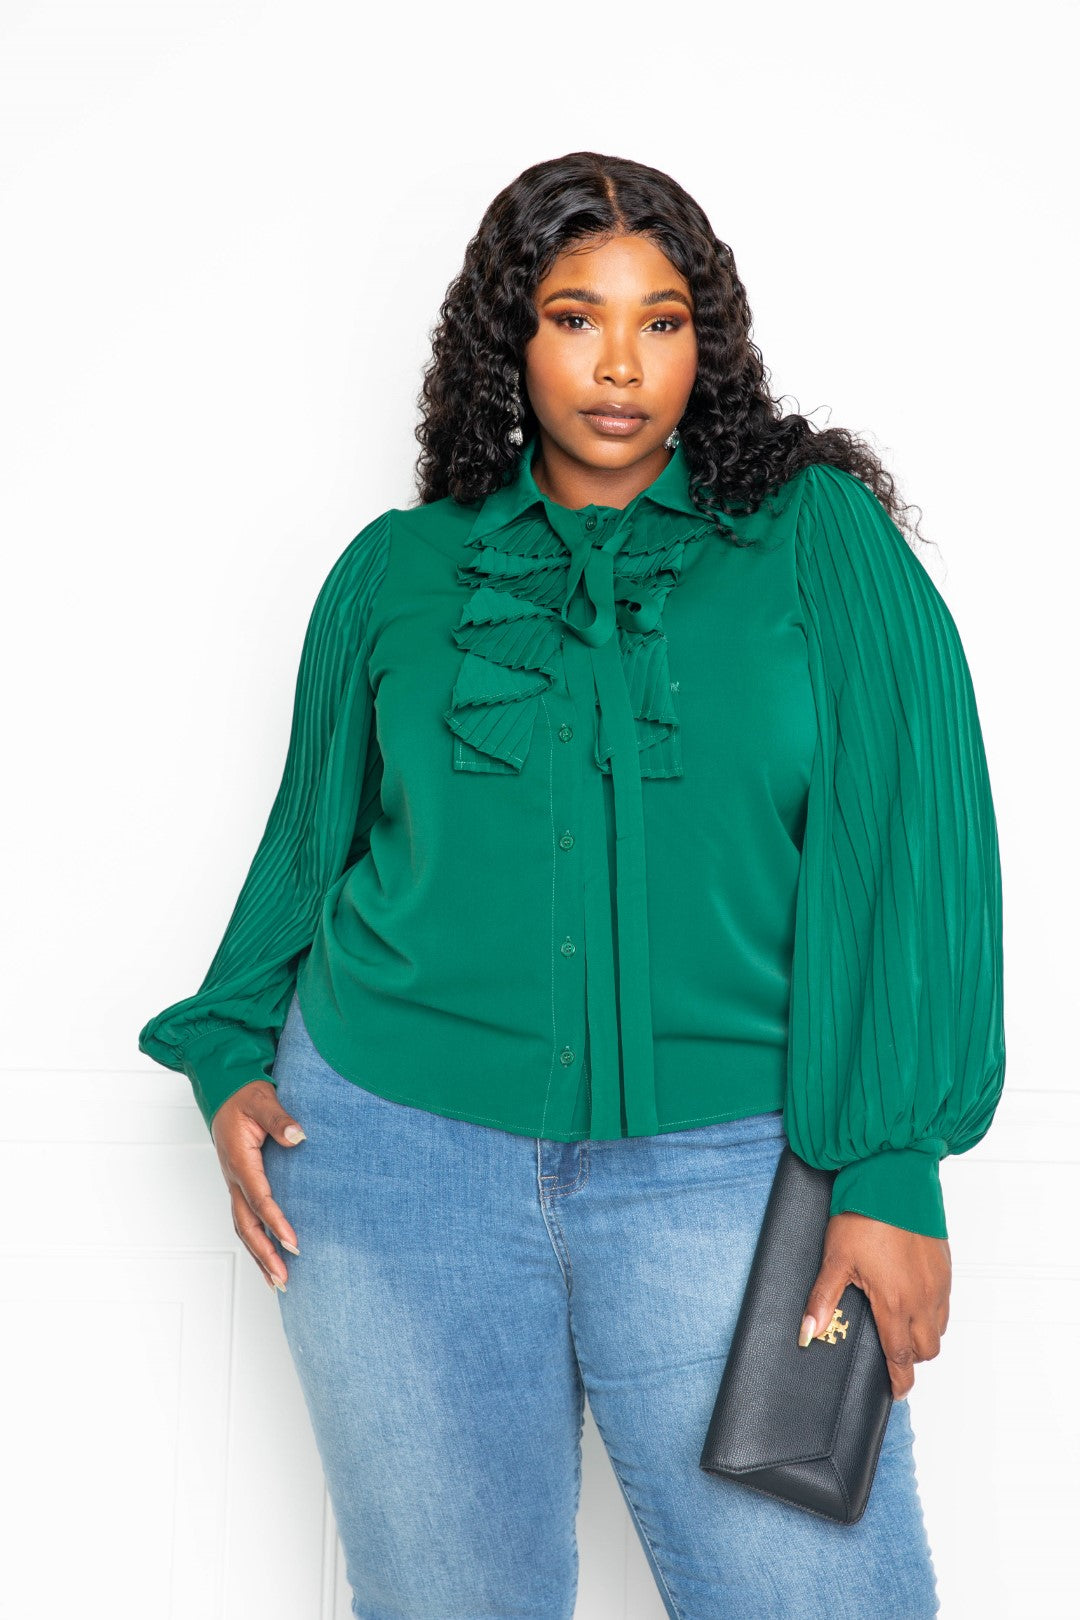 Pleated Sleeve Blouse With Waterfall Frill And Bow | Black, Forrest Green, PLUS SIZE, PLUS SIZE TOPS, SALE, SALE PLUS SIZE | Style Your Curves